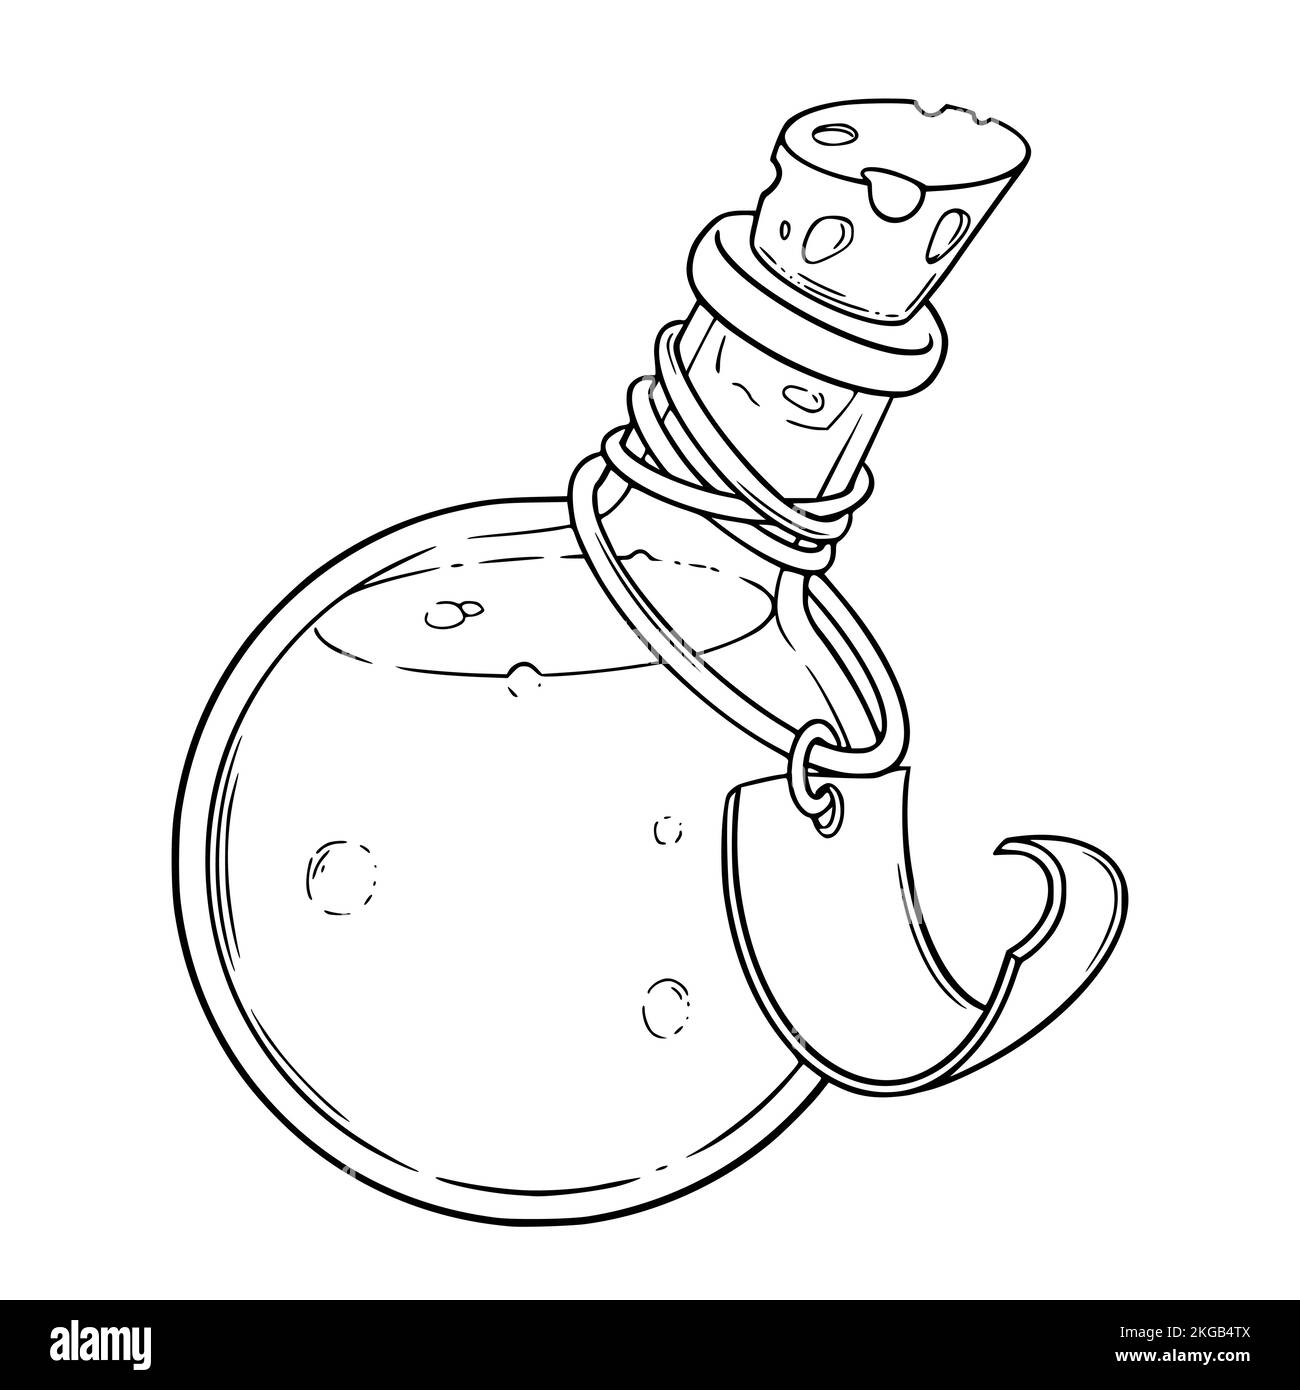 Closed apothecary bottle sketch. Glass bottle or vial with a label for games. Vector illustration isolated in white background Stock Vector